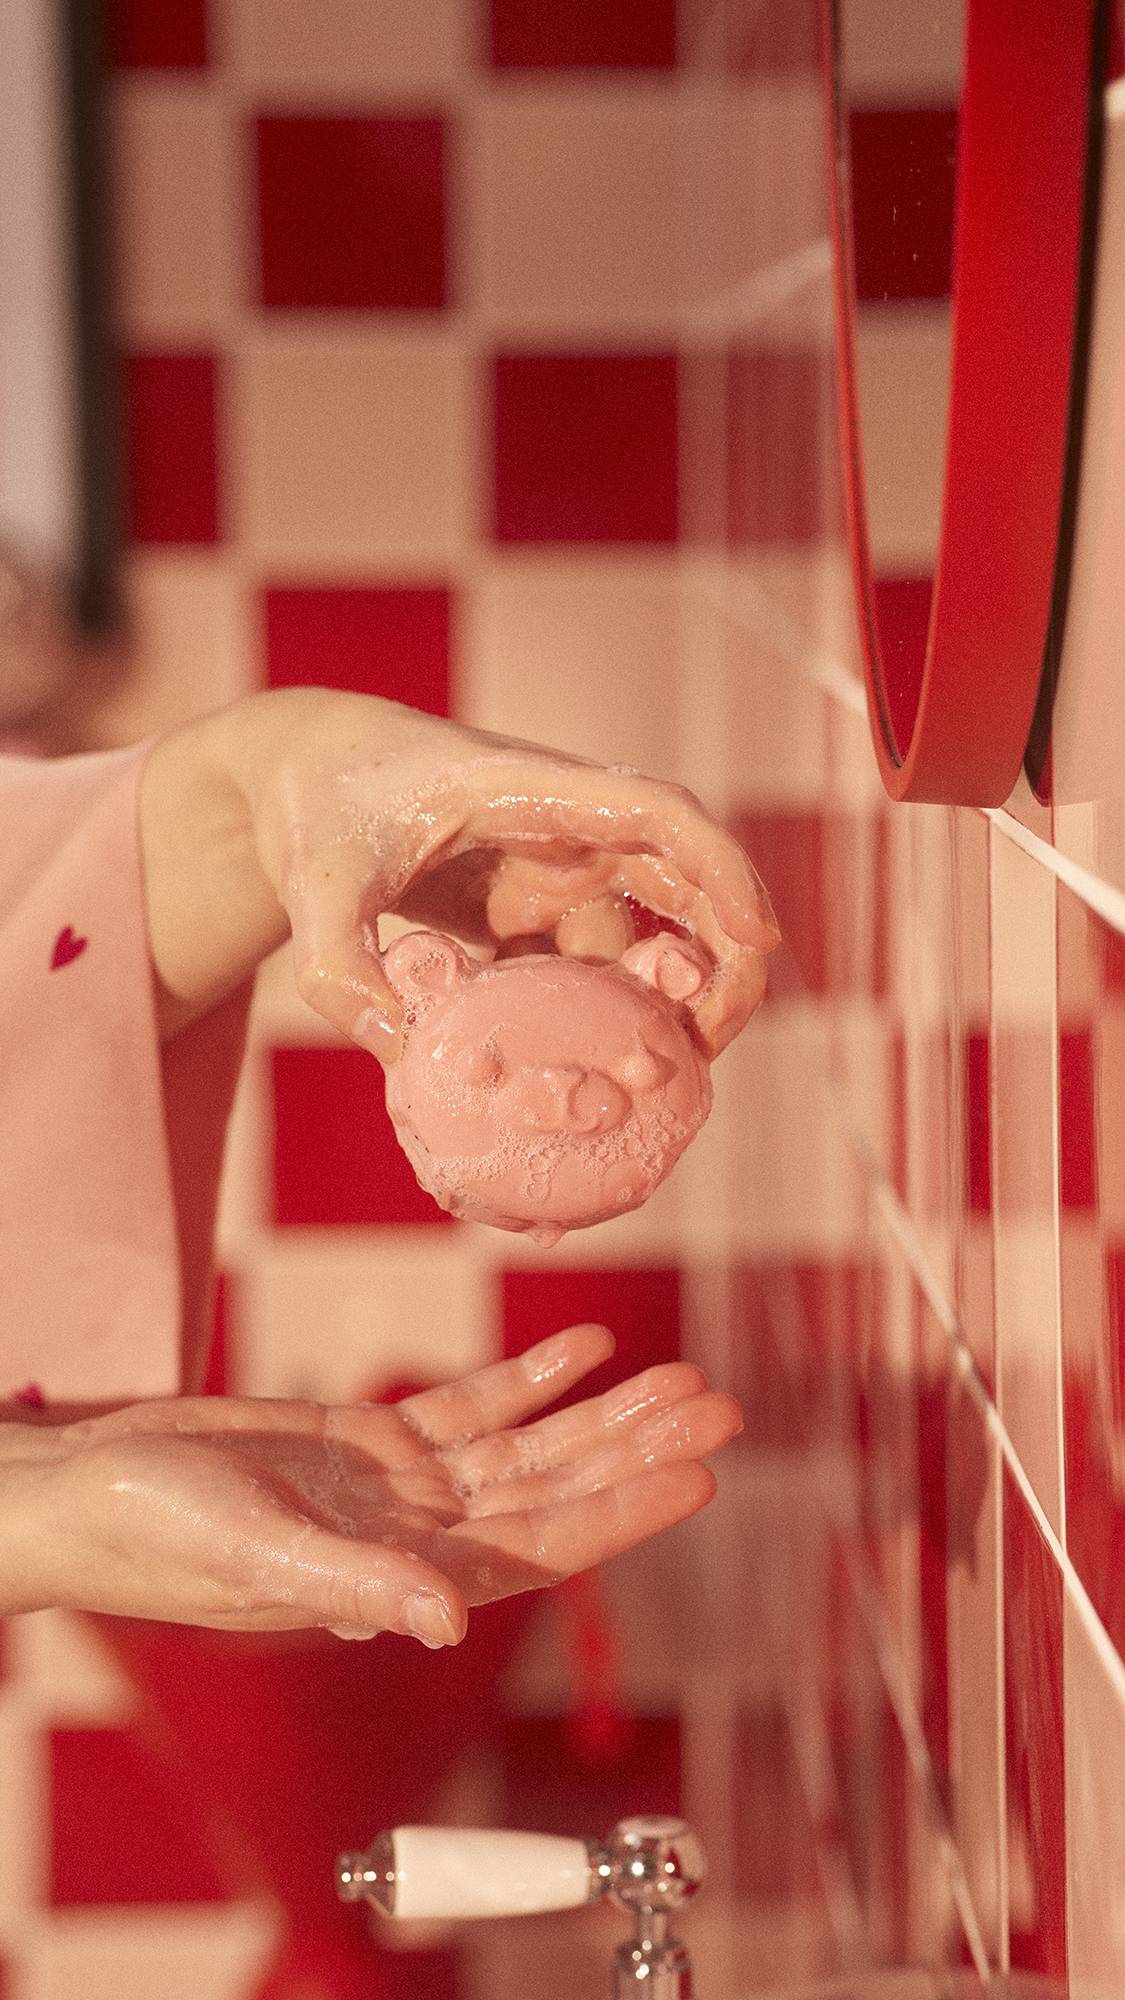 Image shows a close-up of the model's hands gently holding the My Li'l Chia Bear, dotted with soap suds, above a sink.